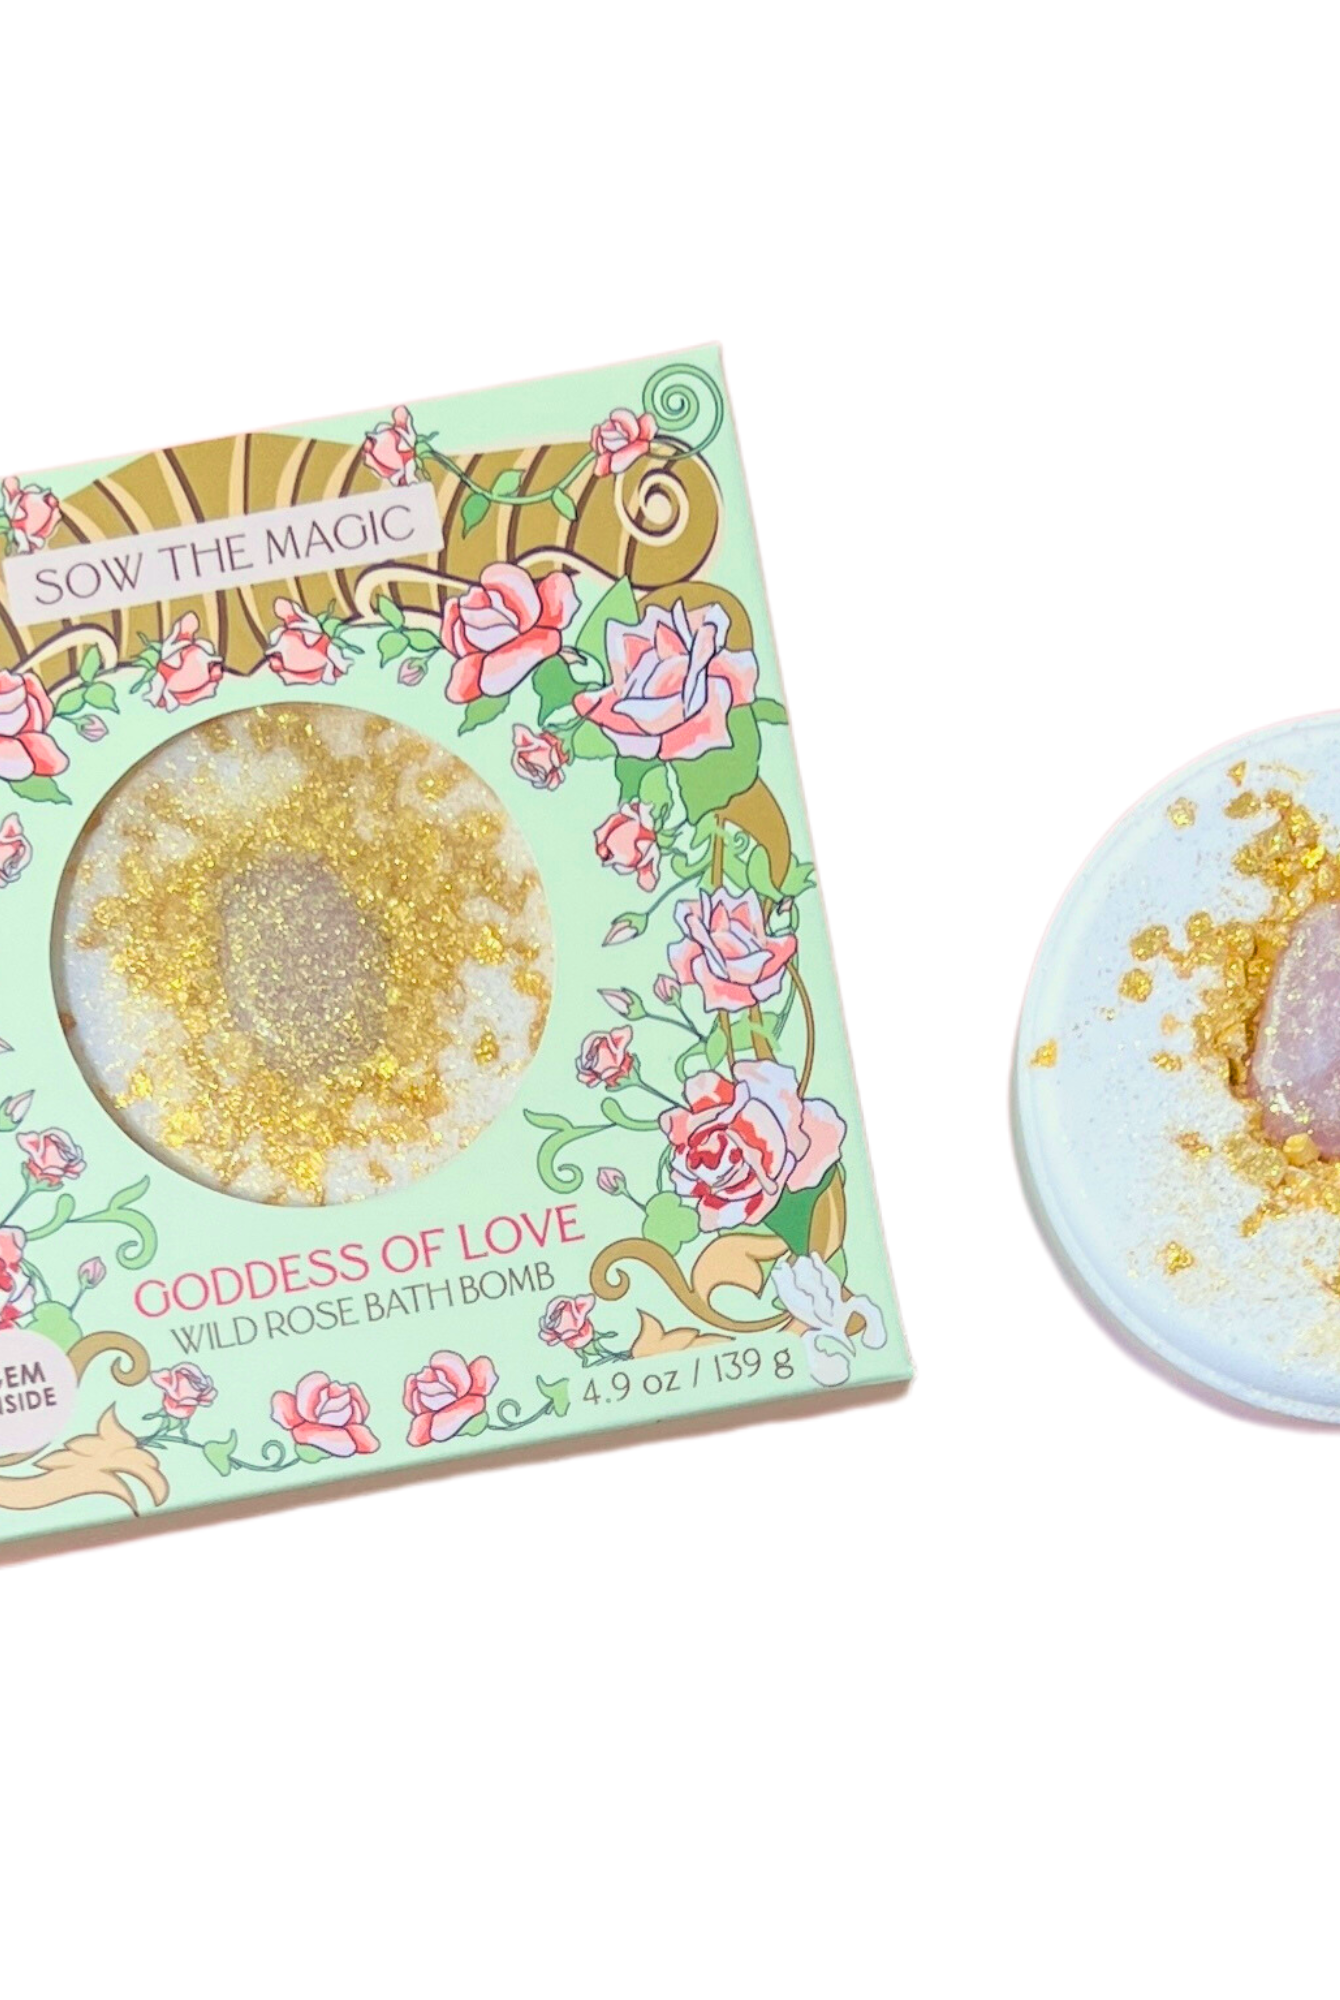 A Sow the Magic Goddess of Love Wild Rose Bath Bomb with Rose Quartz bath bomb with sparkly gold glitter and essential oil, next to its floral packaging on a white background.